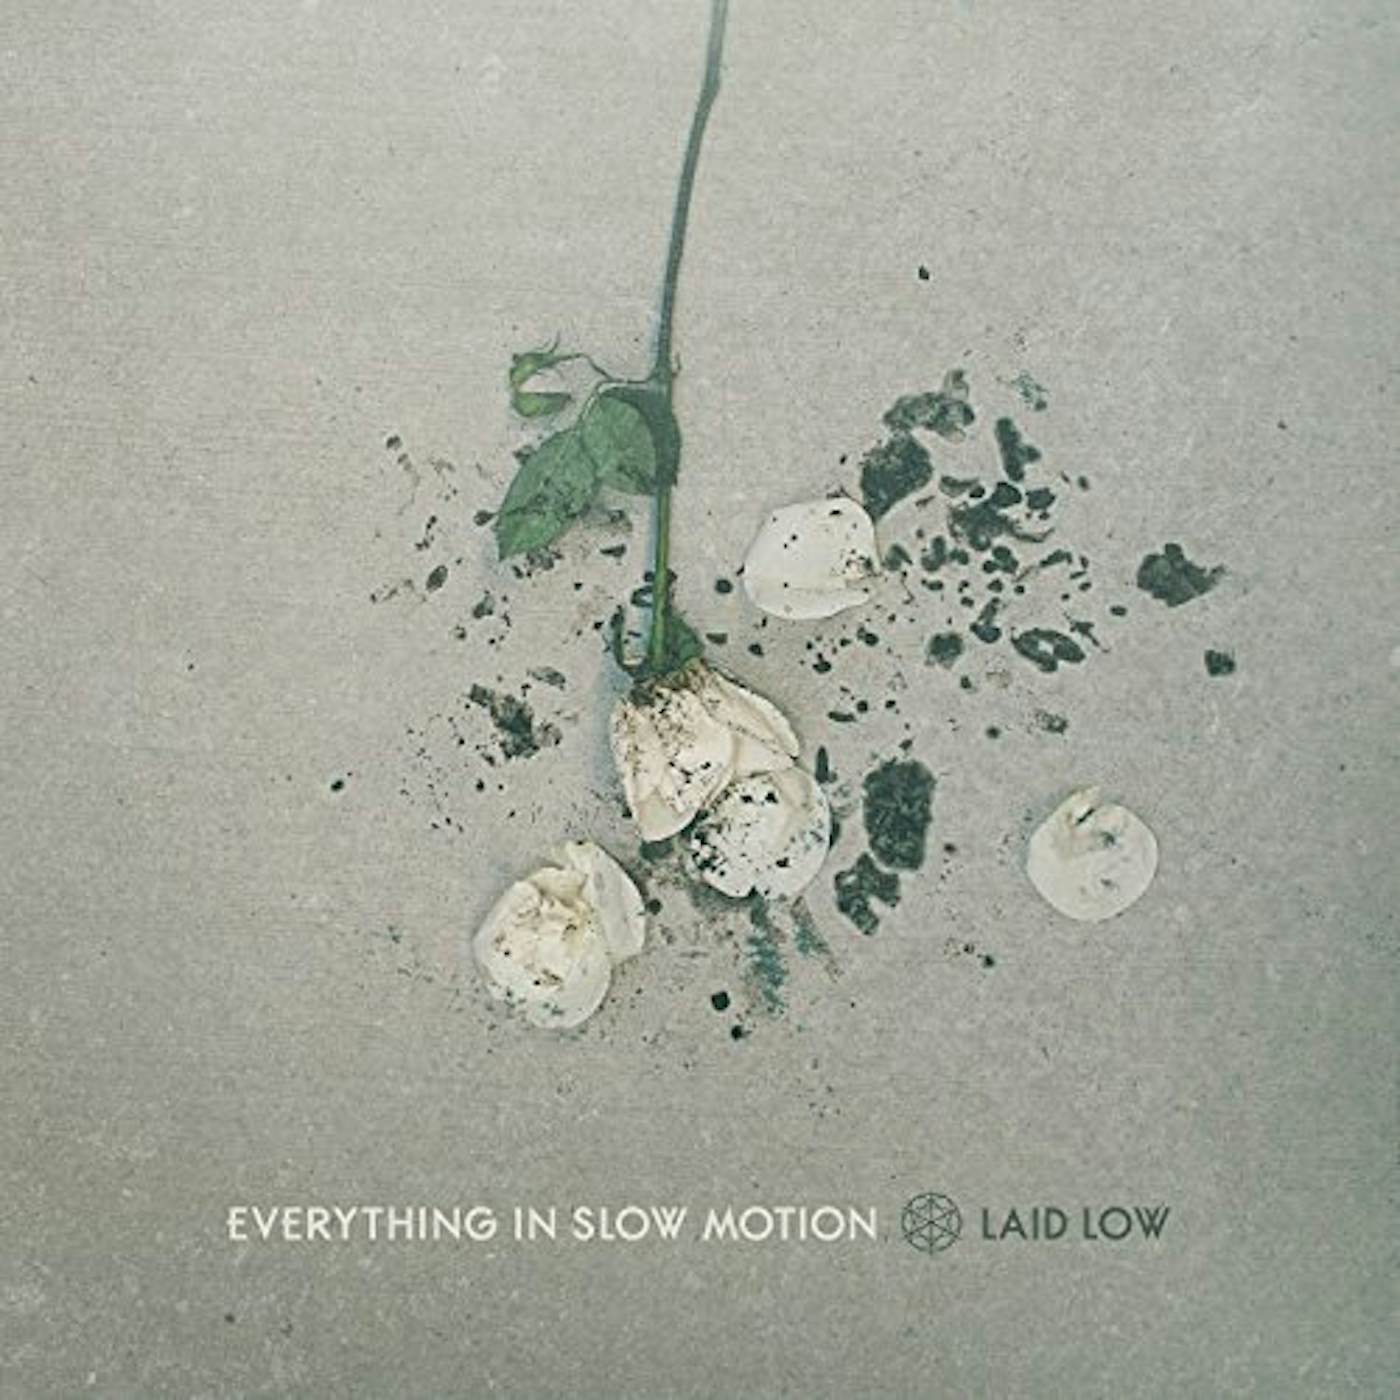 Everything In Slow Motion LAID LOW CD